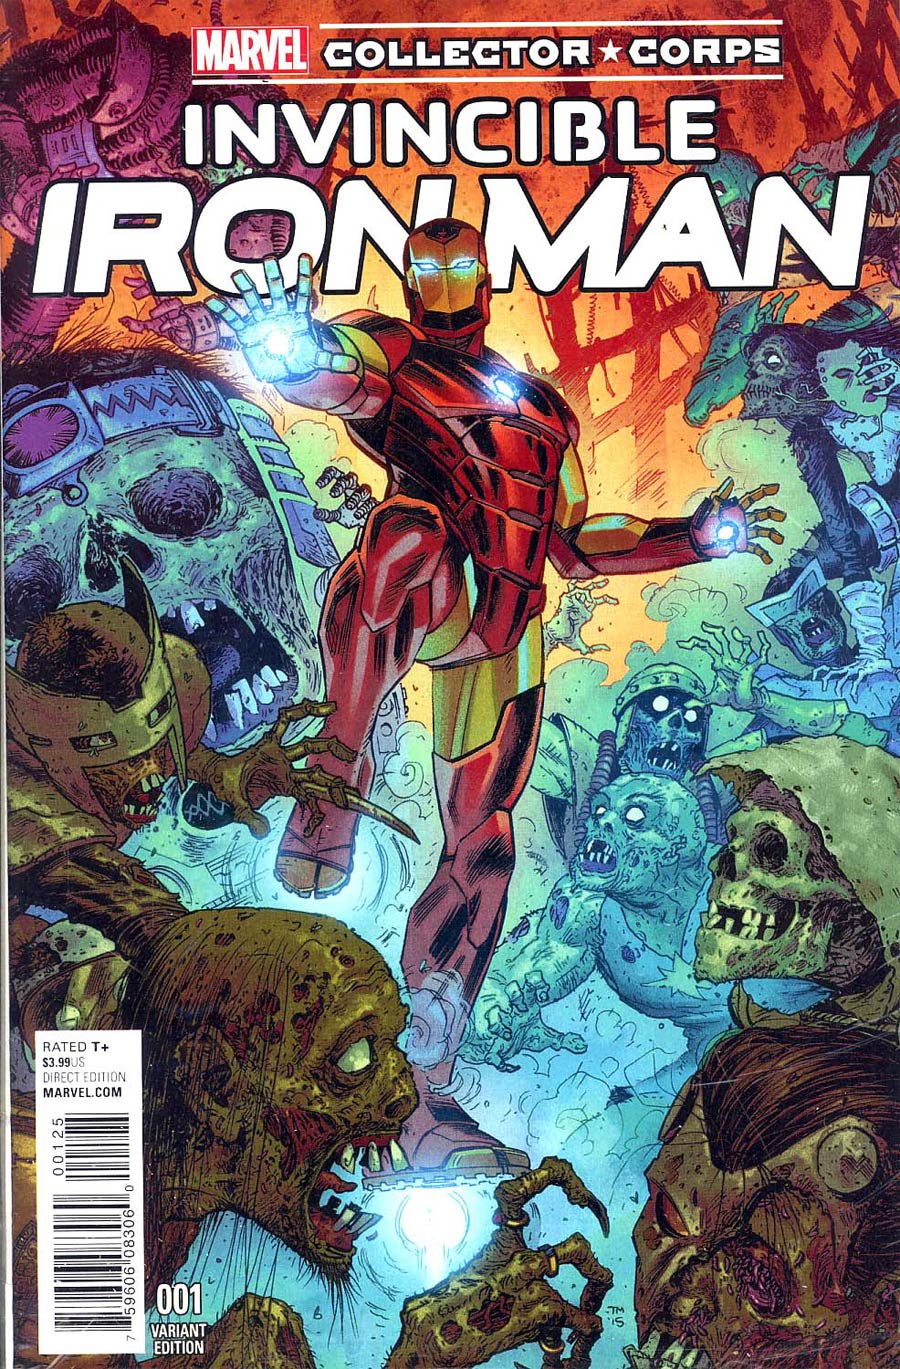 Invincible Iron Man Vol 2 #1 Cover Z-C Marvel Collector Corps Variant Cover